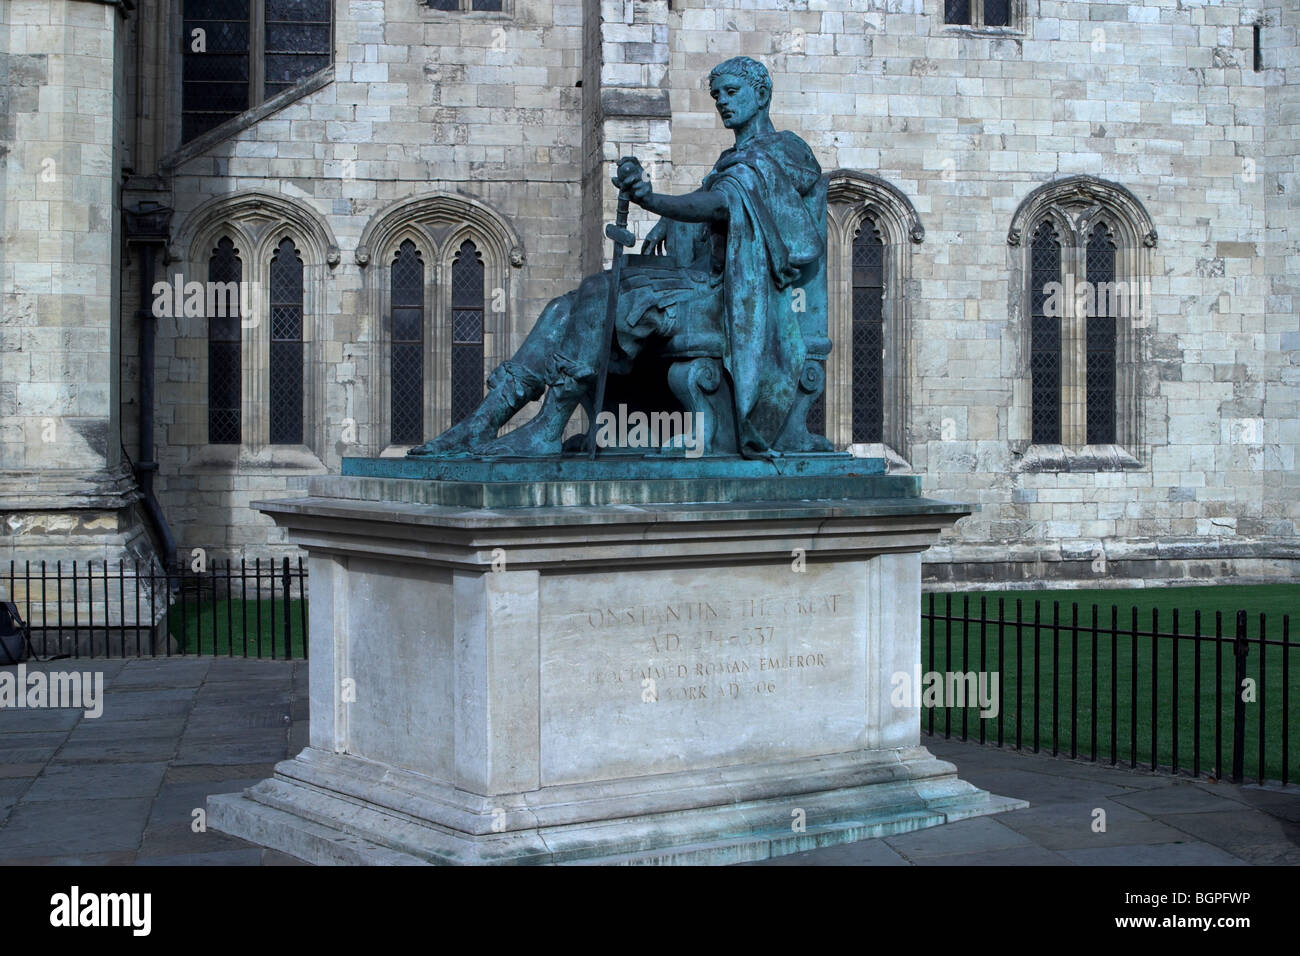 Statue of the Roman Emperor Constantine, erected at York Minster in 1998. Stock Photo